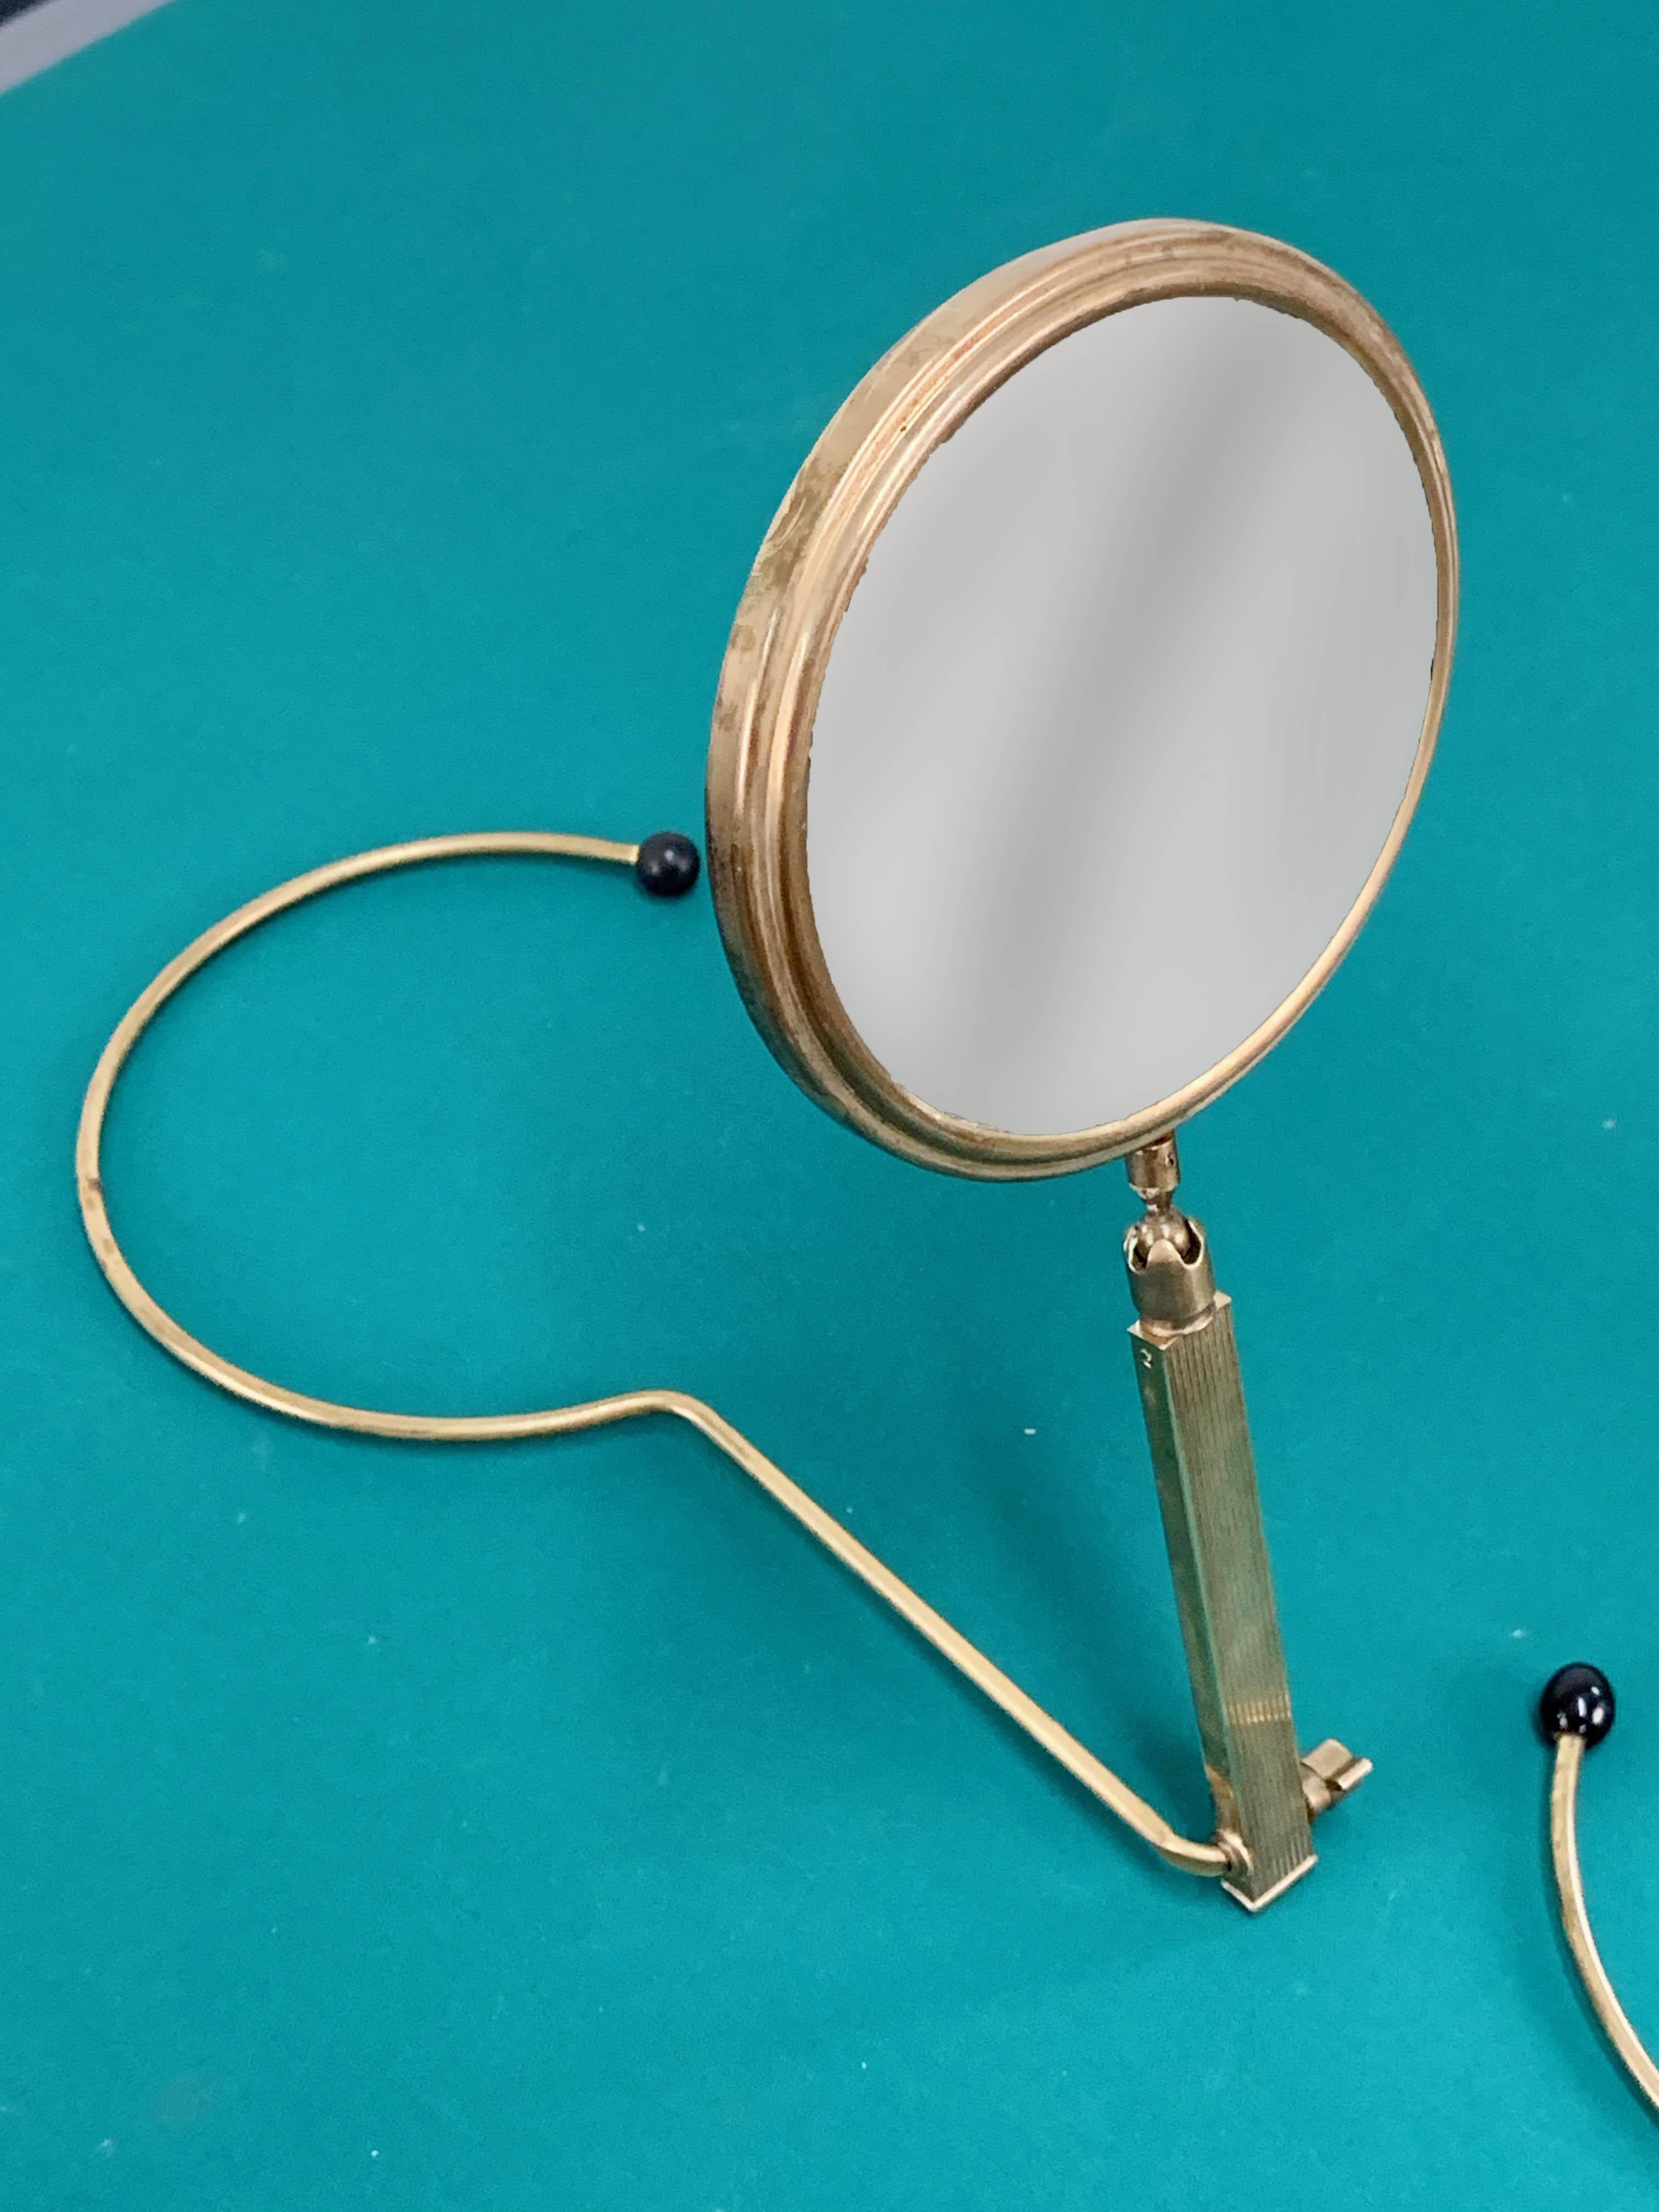 Midcentury Brass French Adjustable Table Mirror with a Two-Sides Stand, 1950s For Sale 2